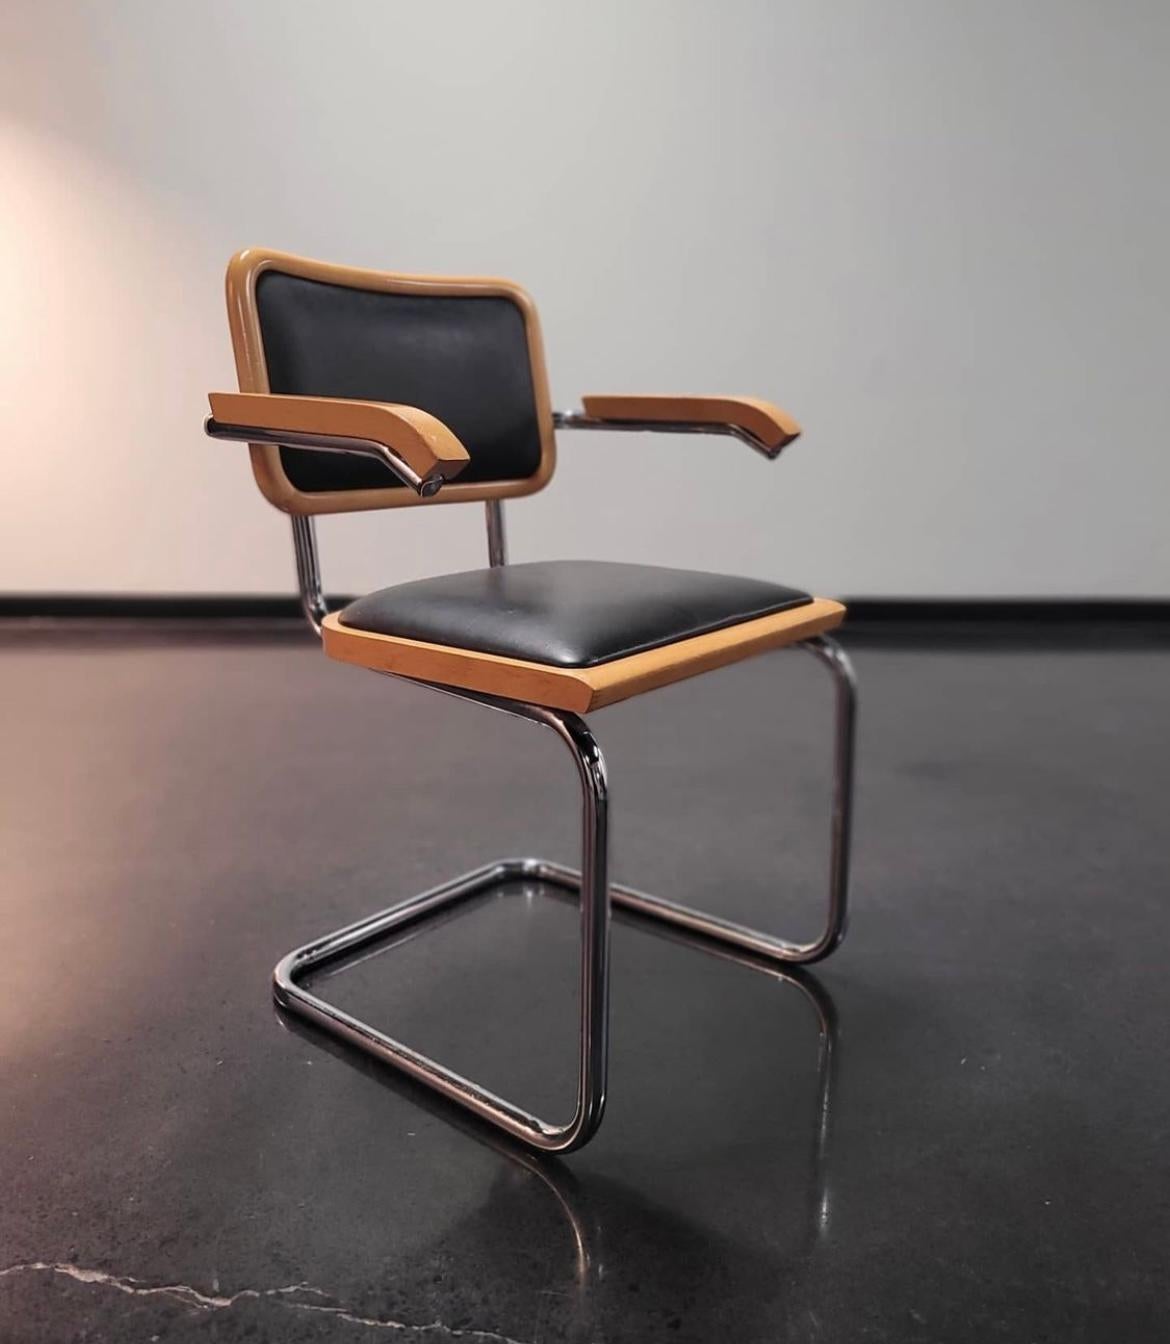 Rare set of 6 Marcel Breuer black vinyl Cesca armchairs, made in Italy. These chairs are part of the most important list from the 20th century design furniture collection. Although made in the 80s, the Cesca chair was originally designed by Marcel